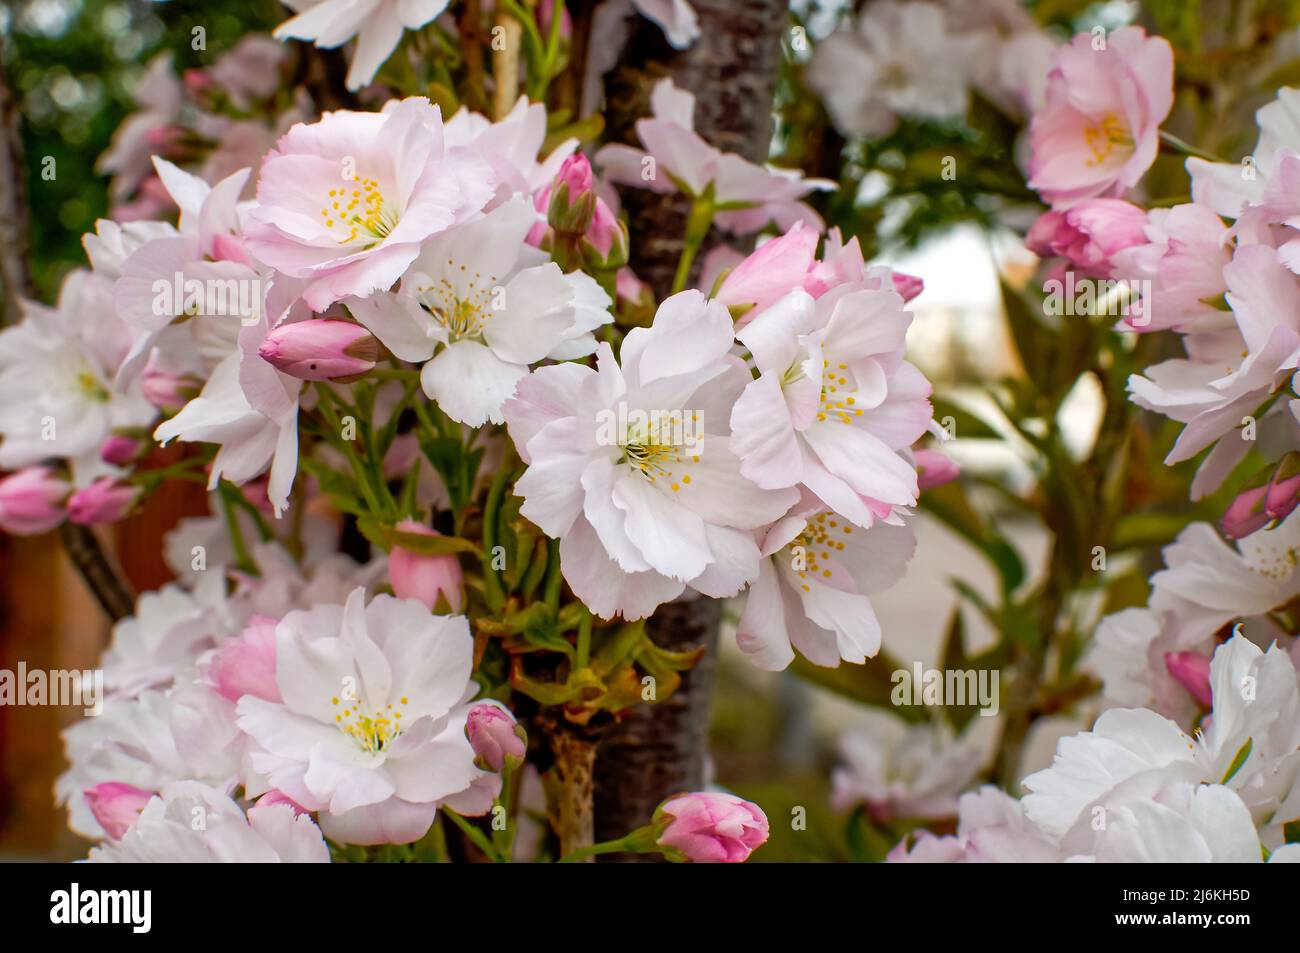 White-pink flowering cherry, at close range, Cerasus serrulata G. Don., Also known as Japanese cherry, Comes from China Stock Photo